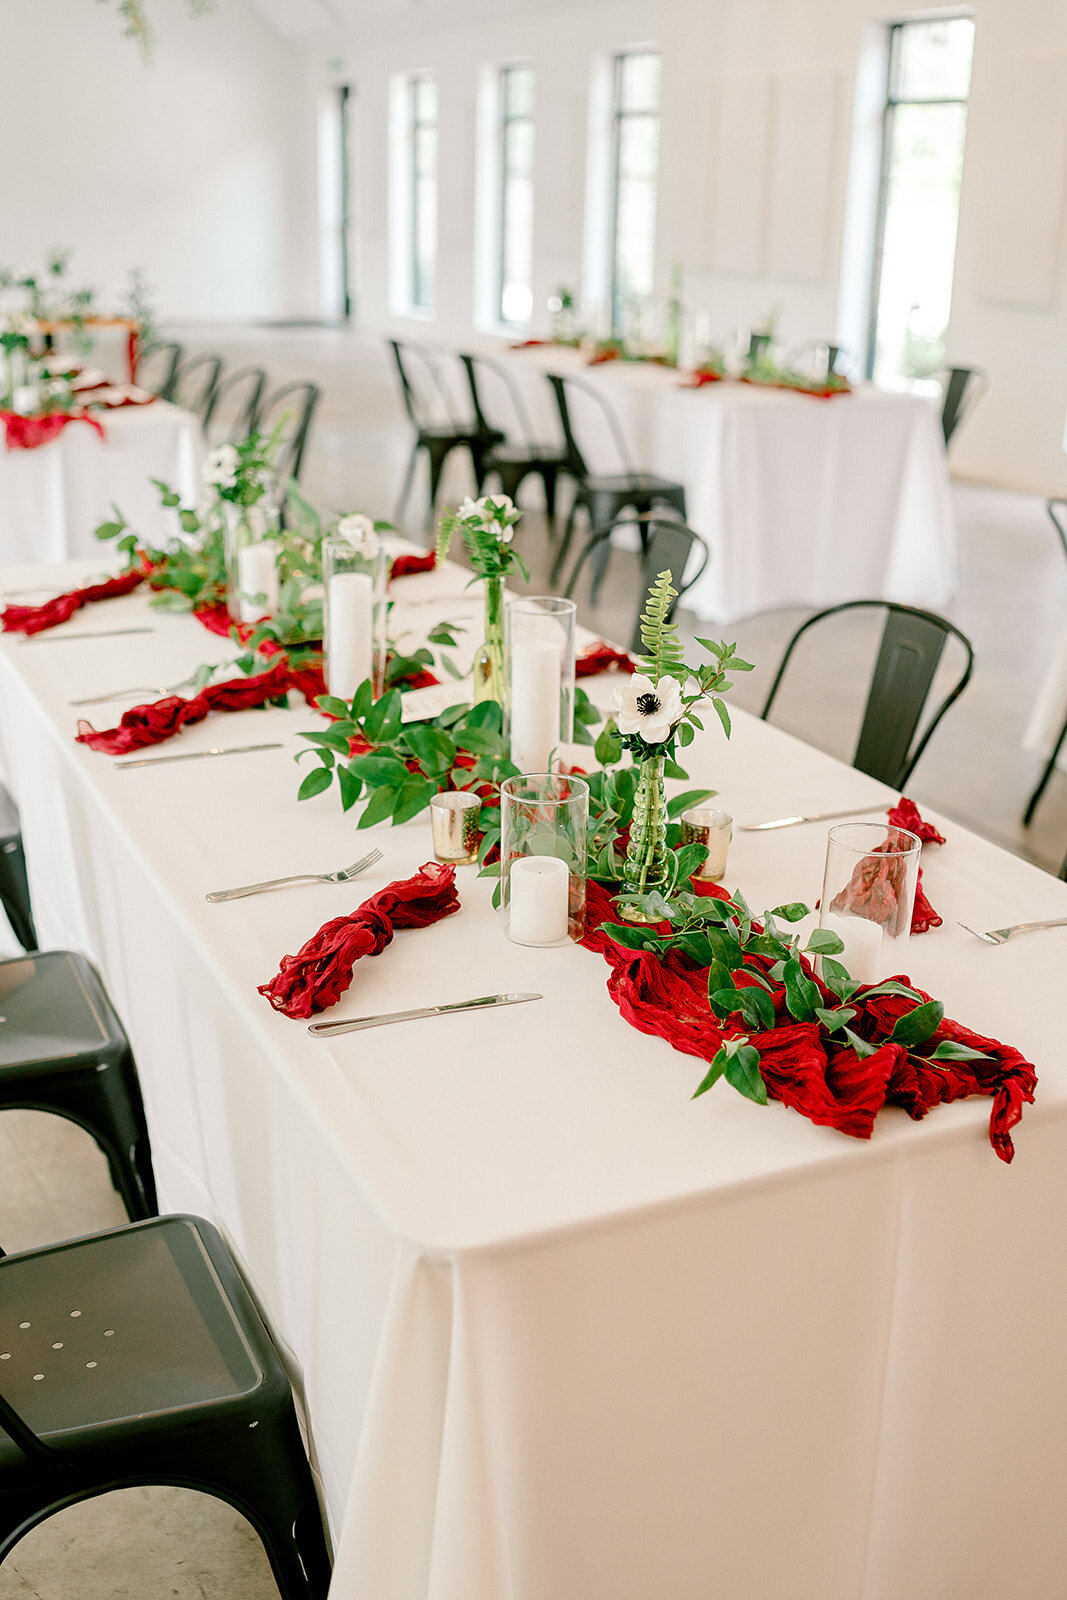 Table setting with red and green tablescape